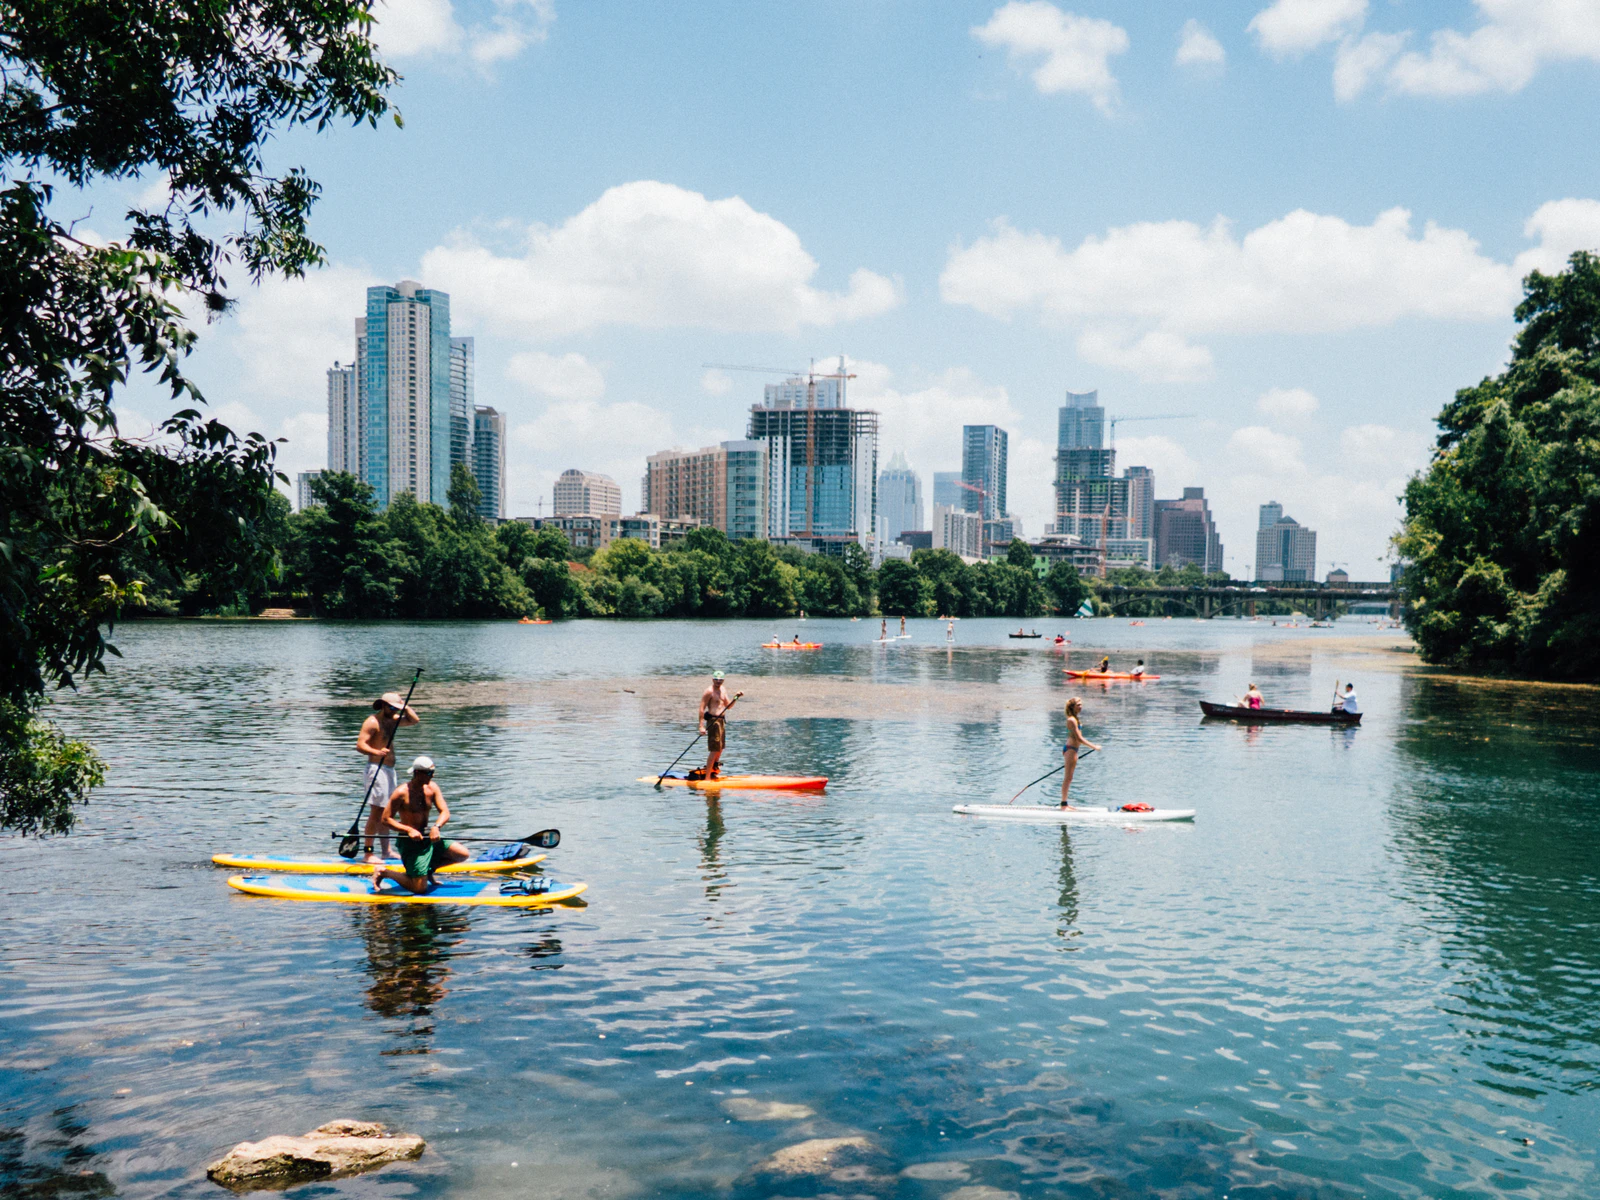 People kayaking and paddle boarding in Austin, Texas river on a sunny day